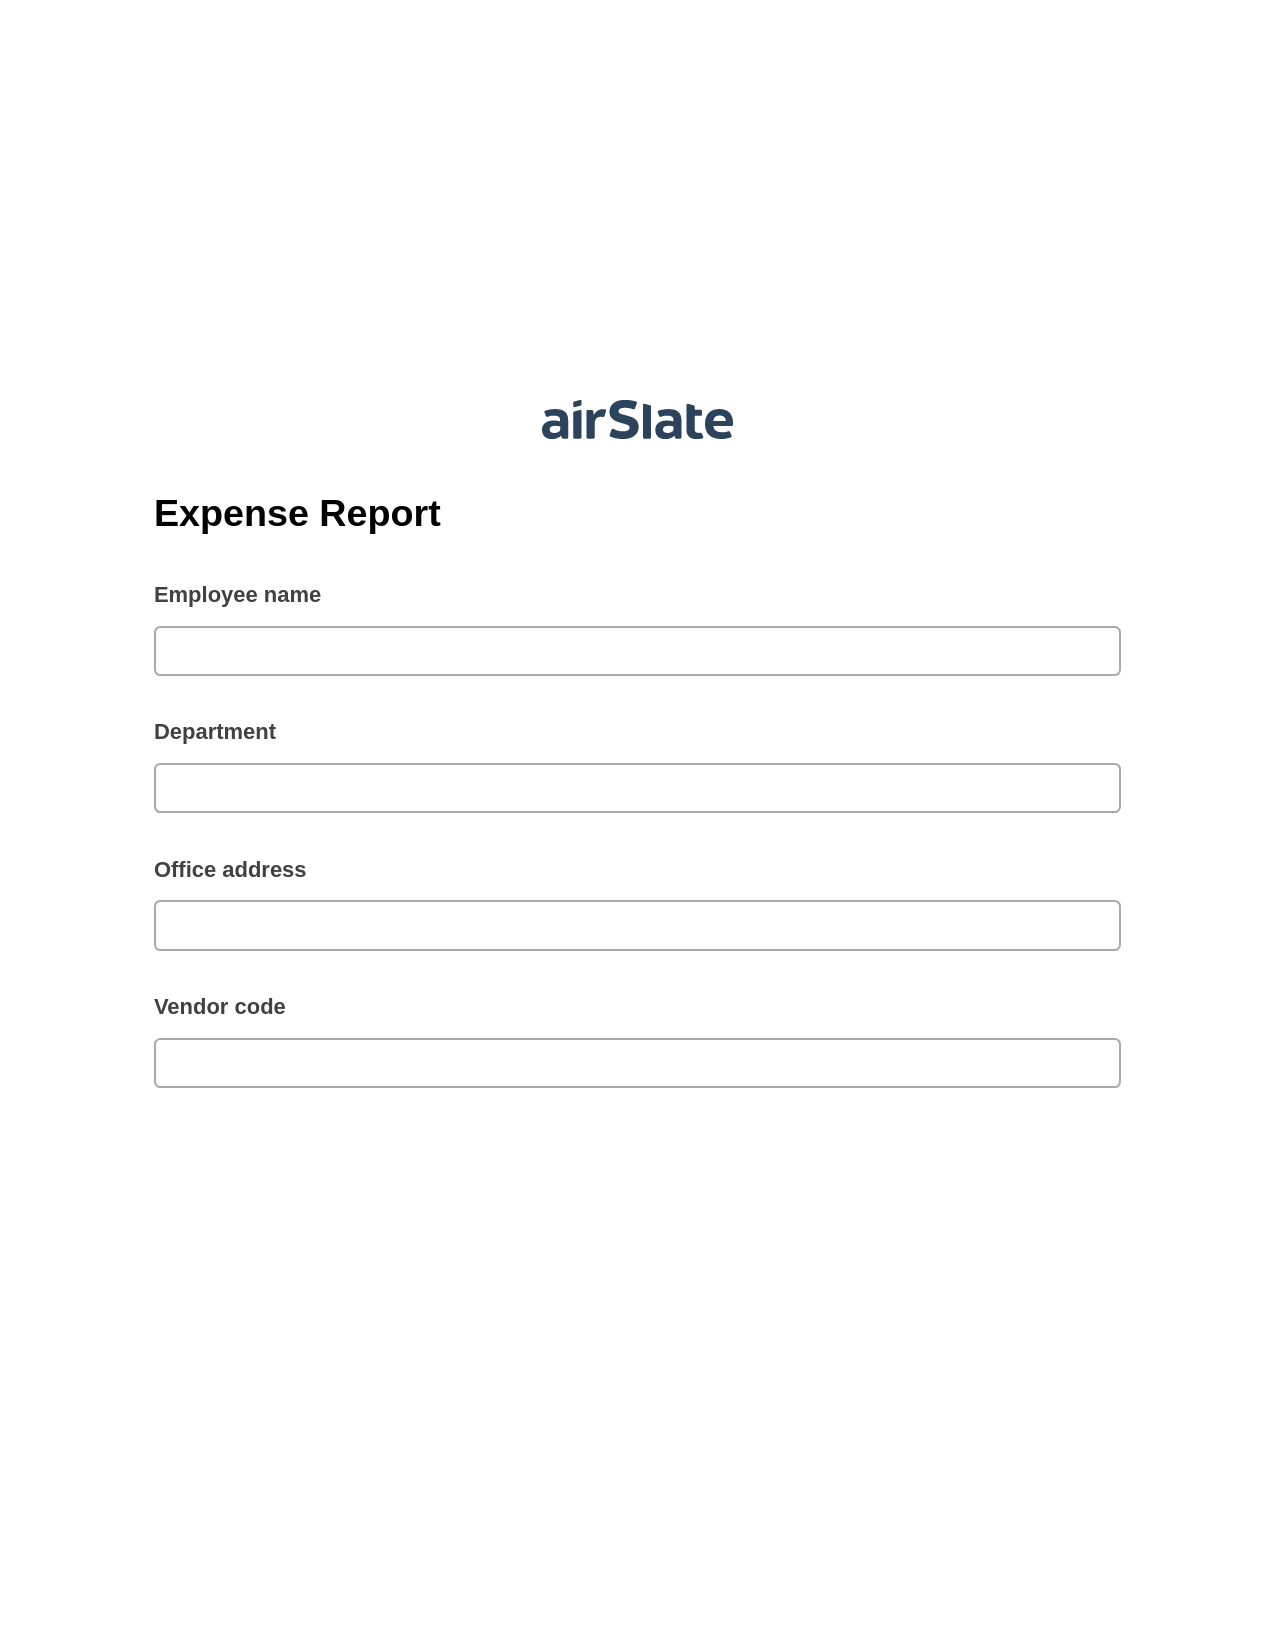 Multirole Expense Report Pre-fill Slate from MS Dynamics 365 Records Bot, Export to MS Dynamics 365 Bot, Box Bot